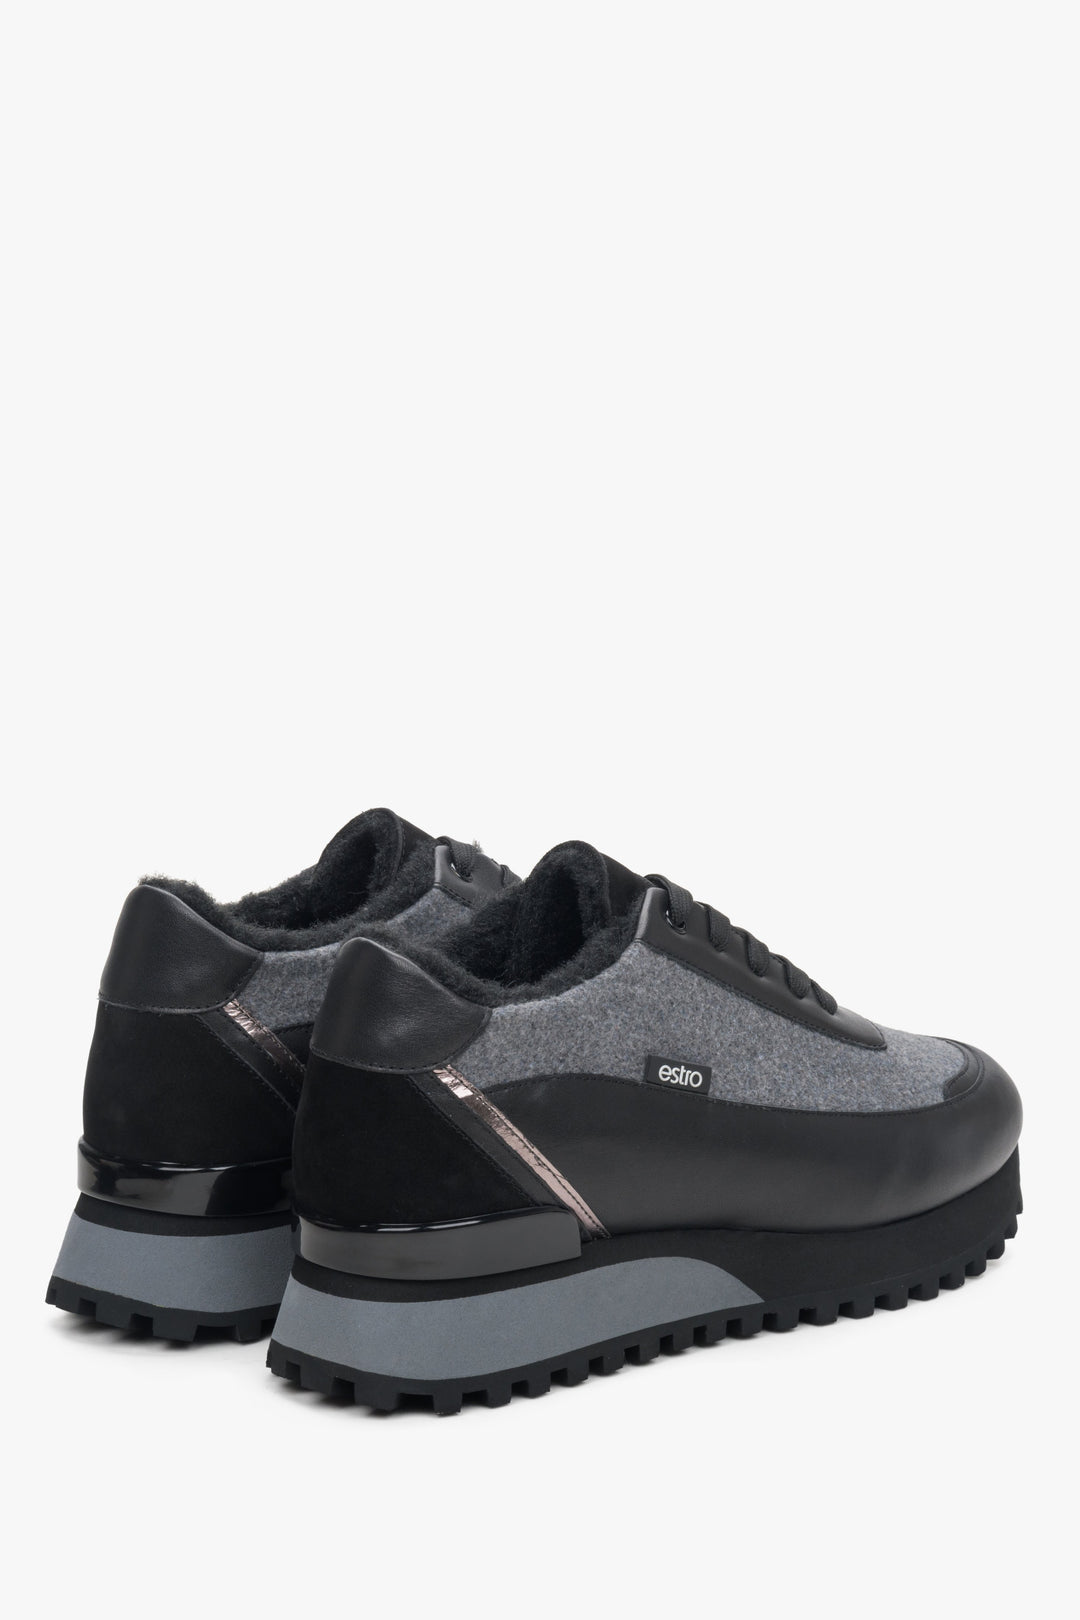 Women's black and grey leather-textile winter sneakers by Estro - close-up on the side line and heel.